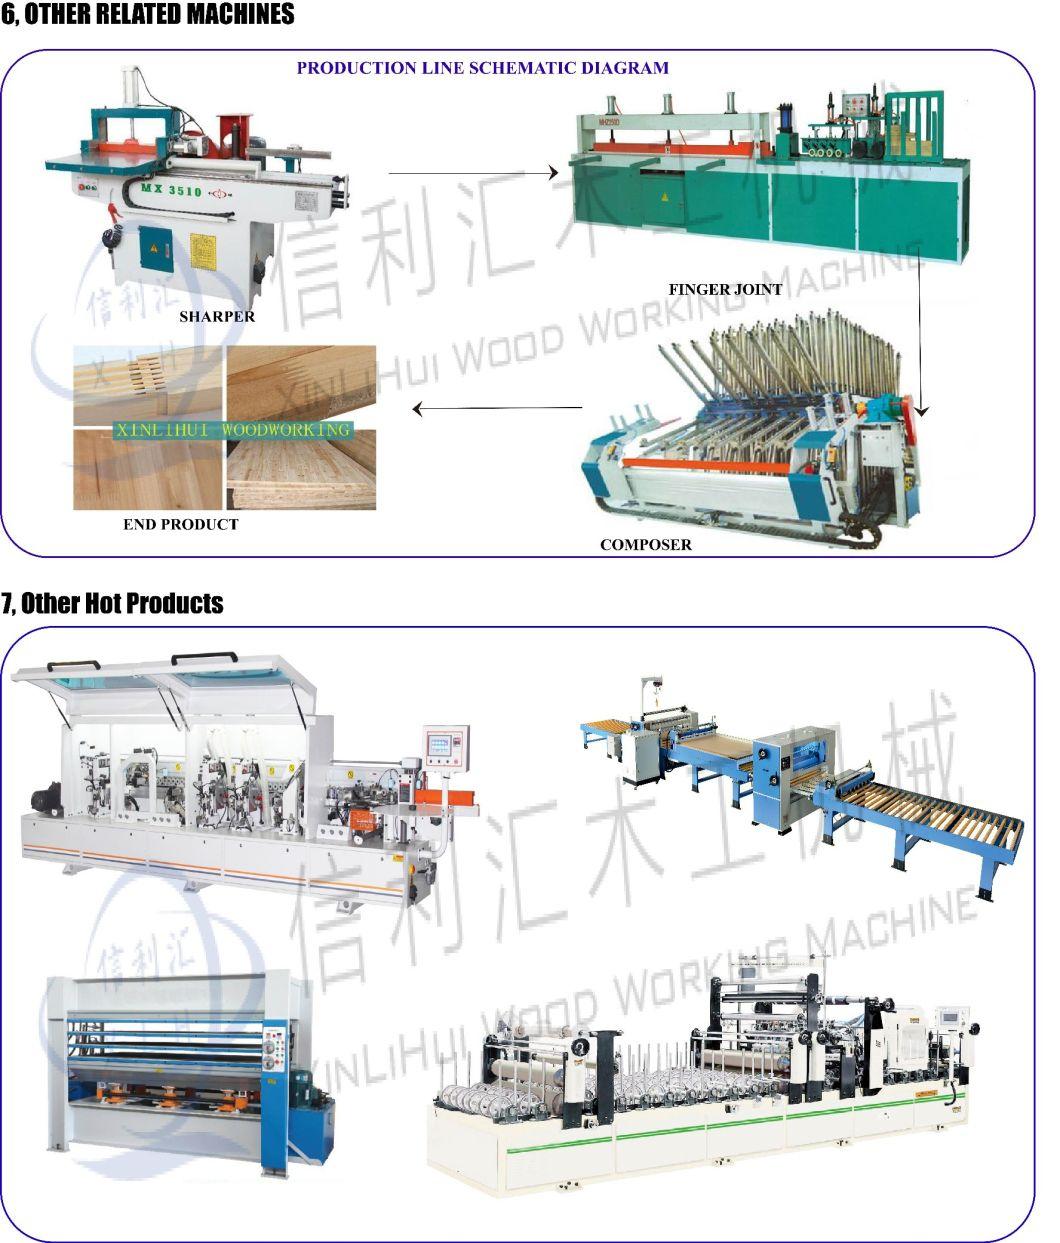 Woodworking Finger Tenoning / Sharper / Assembler Machine with Loader Automatic Wood Jointing Press Machine